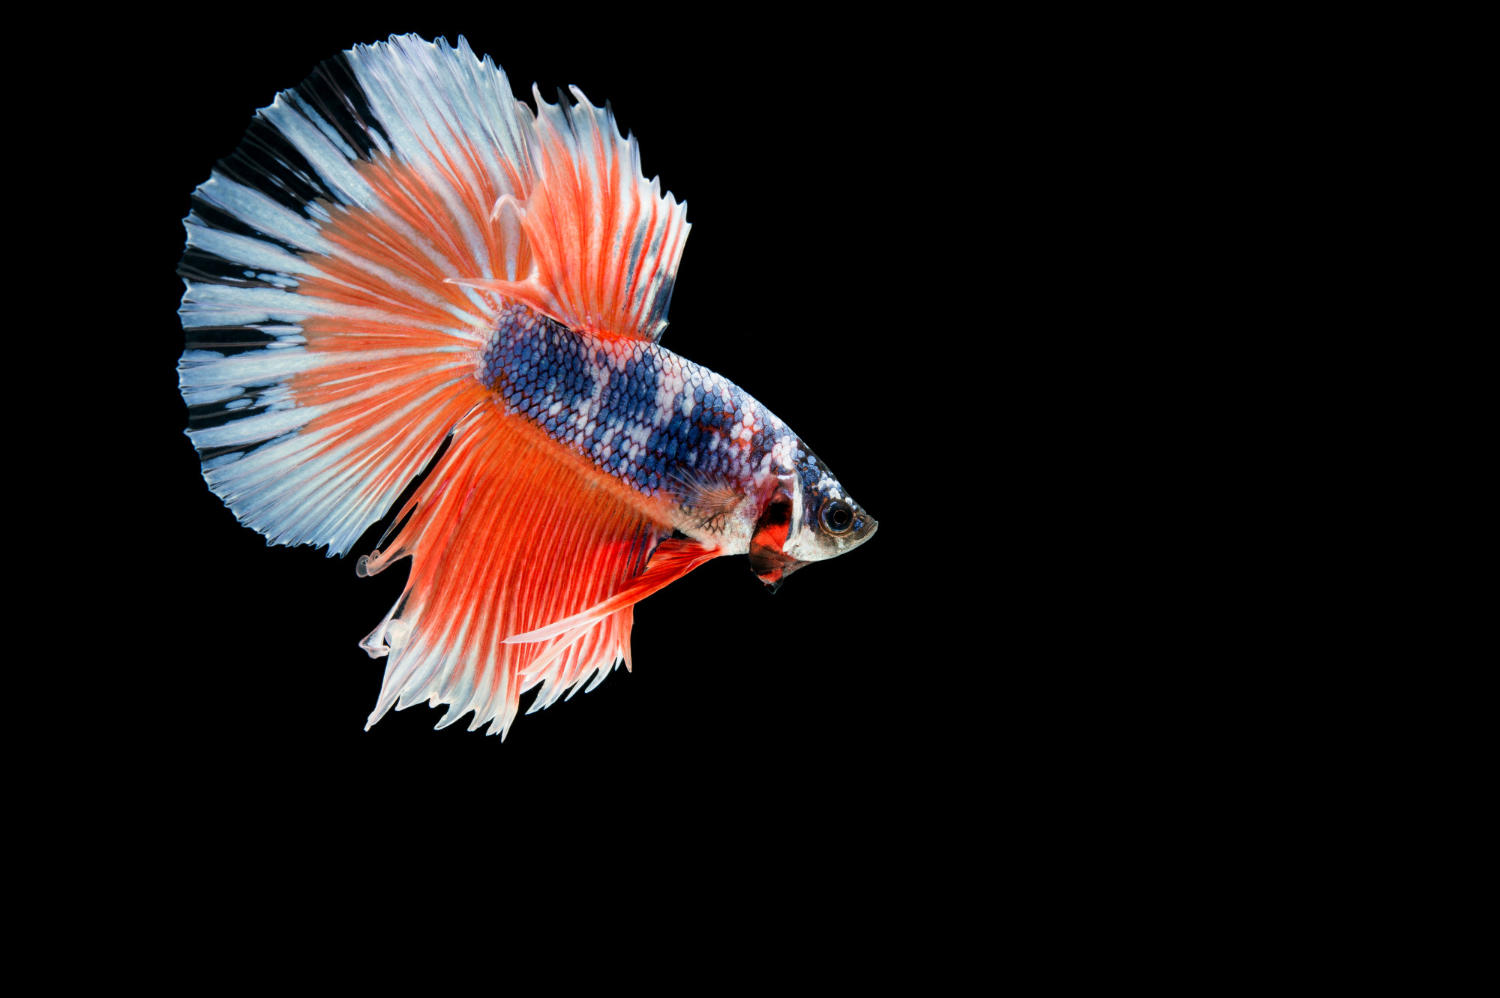 Top 5 Fish Species for Keeping Your Aquarium Clean: A Guide for Beginners